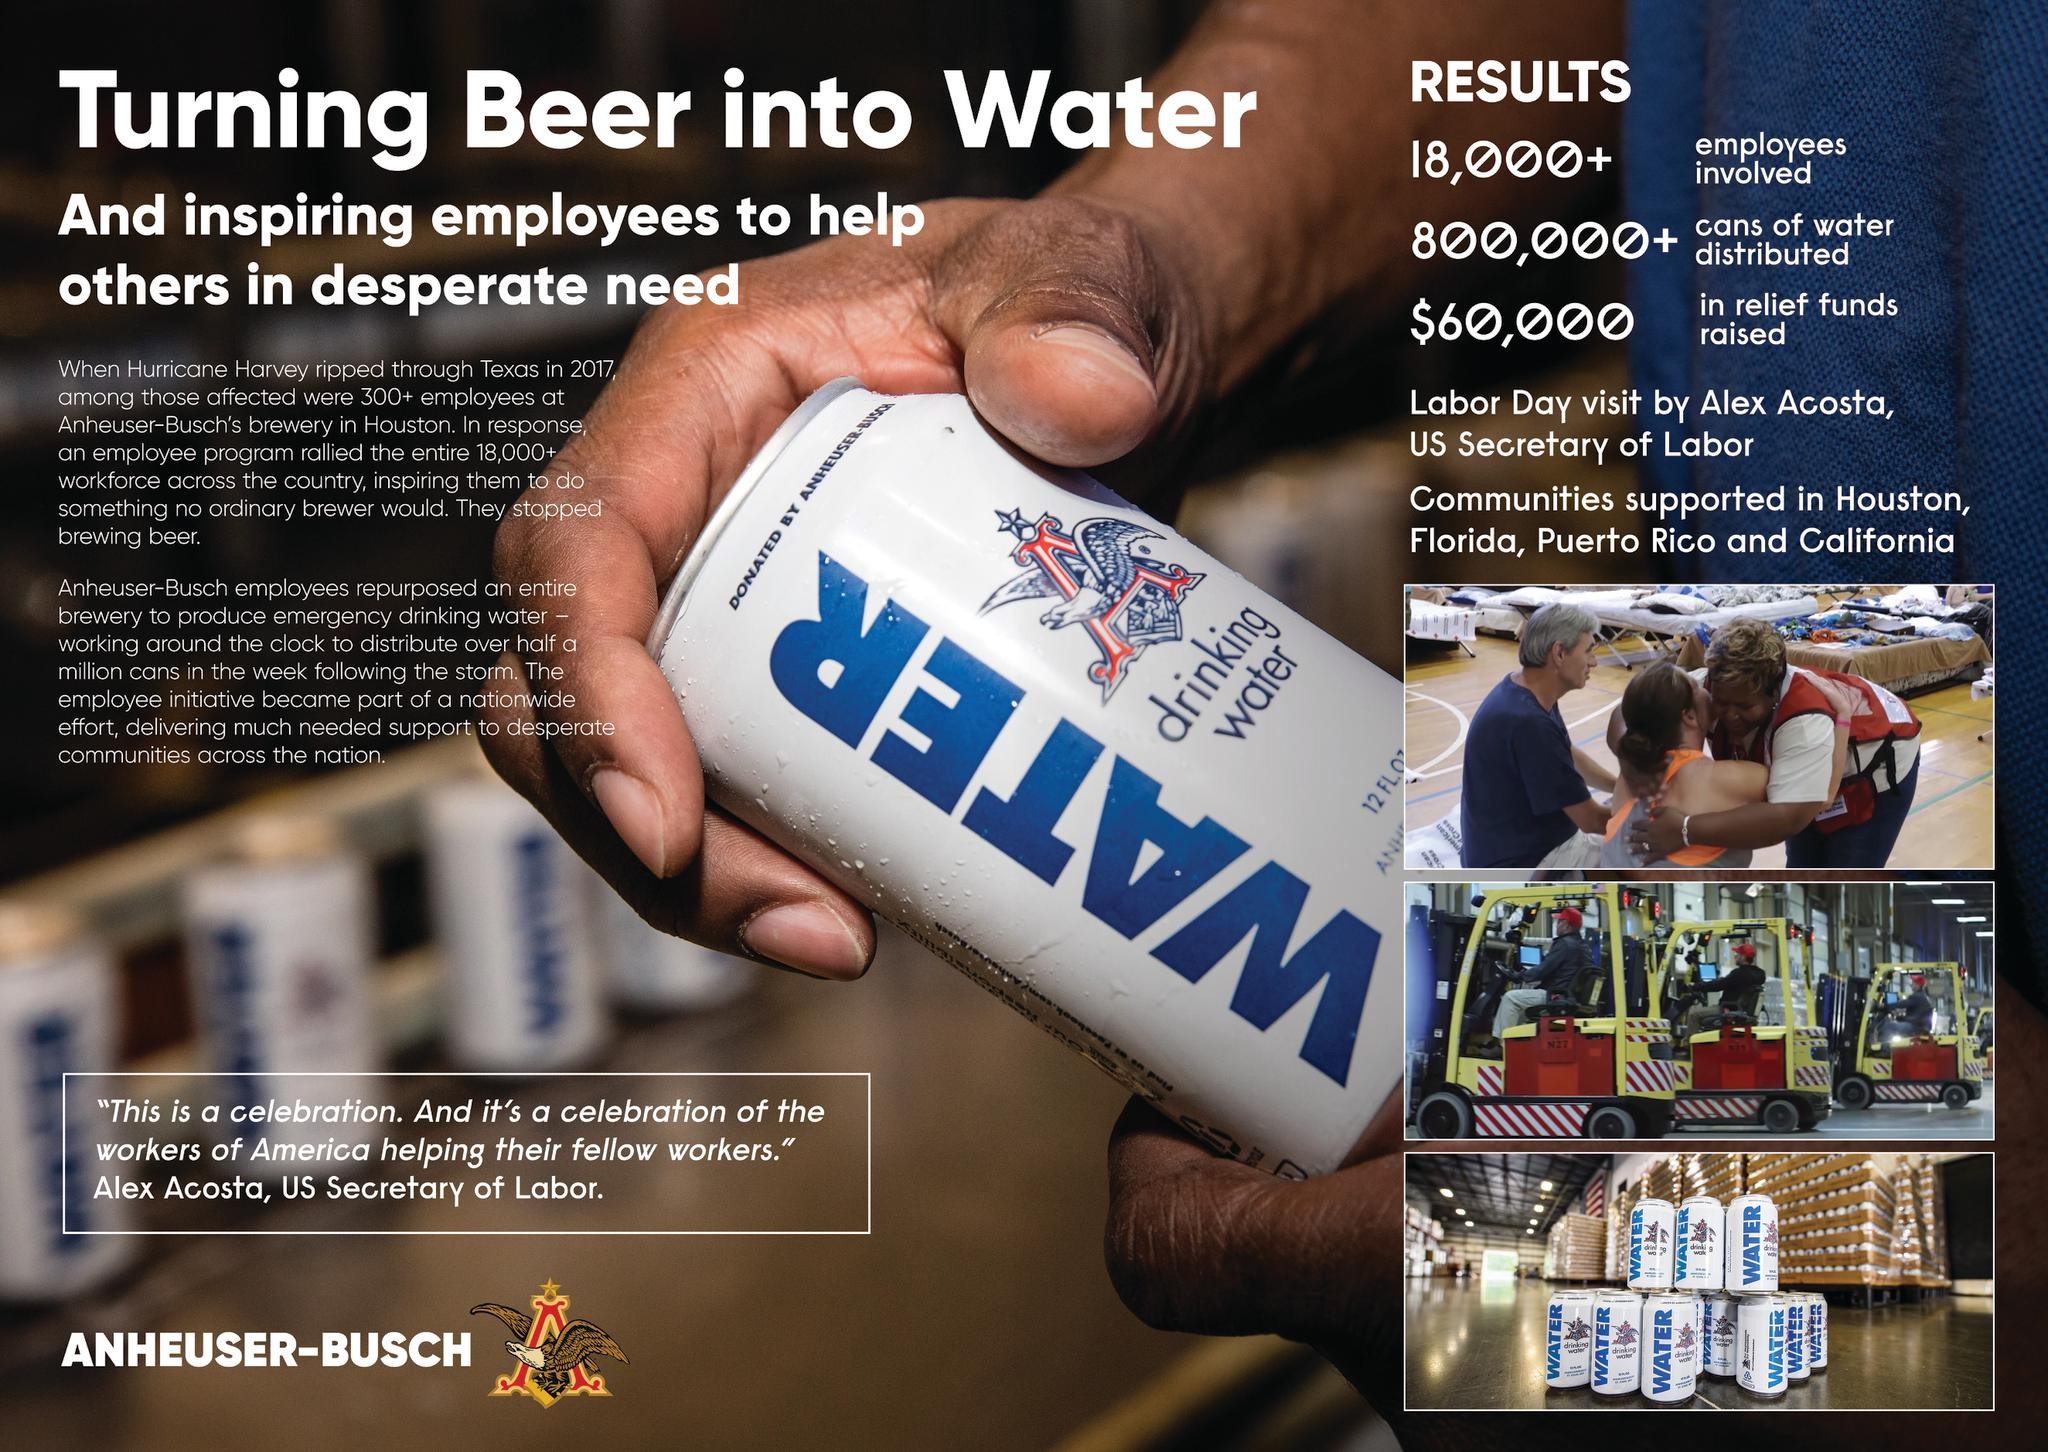 TURNING BEER INTO WATER